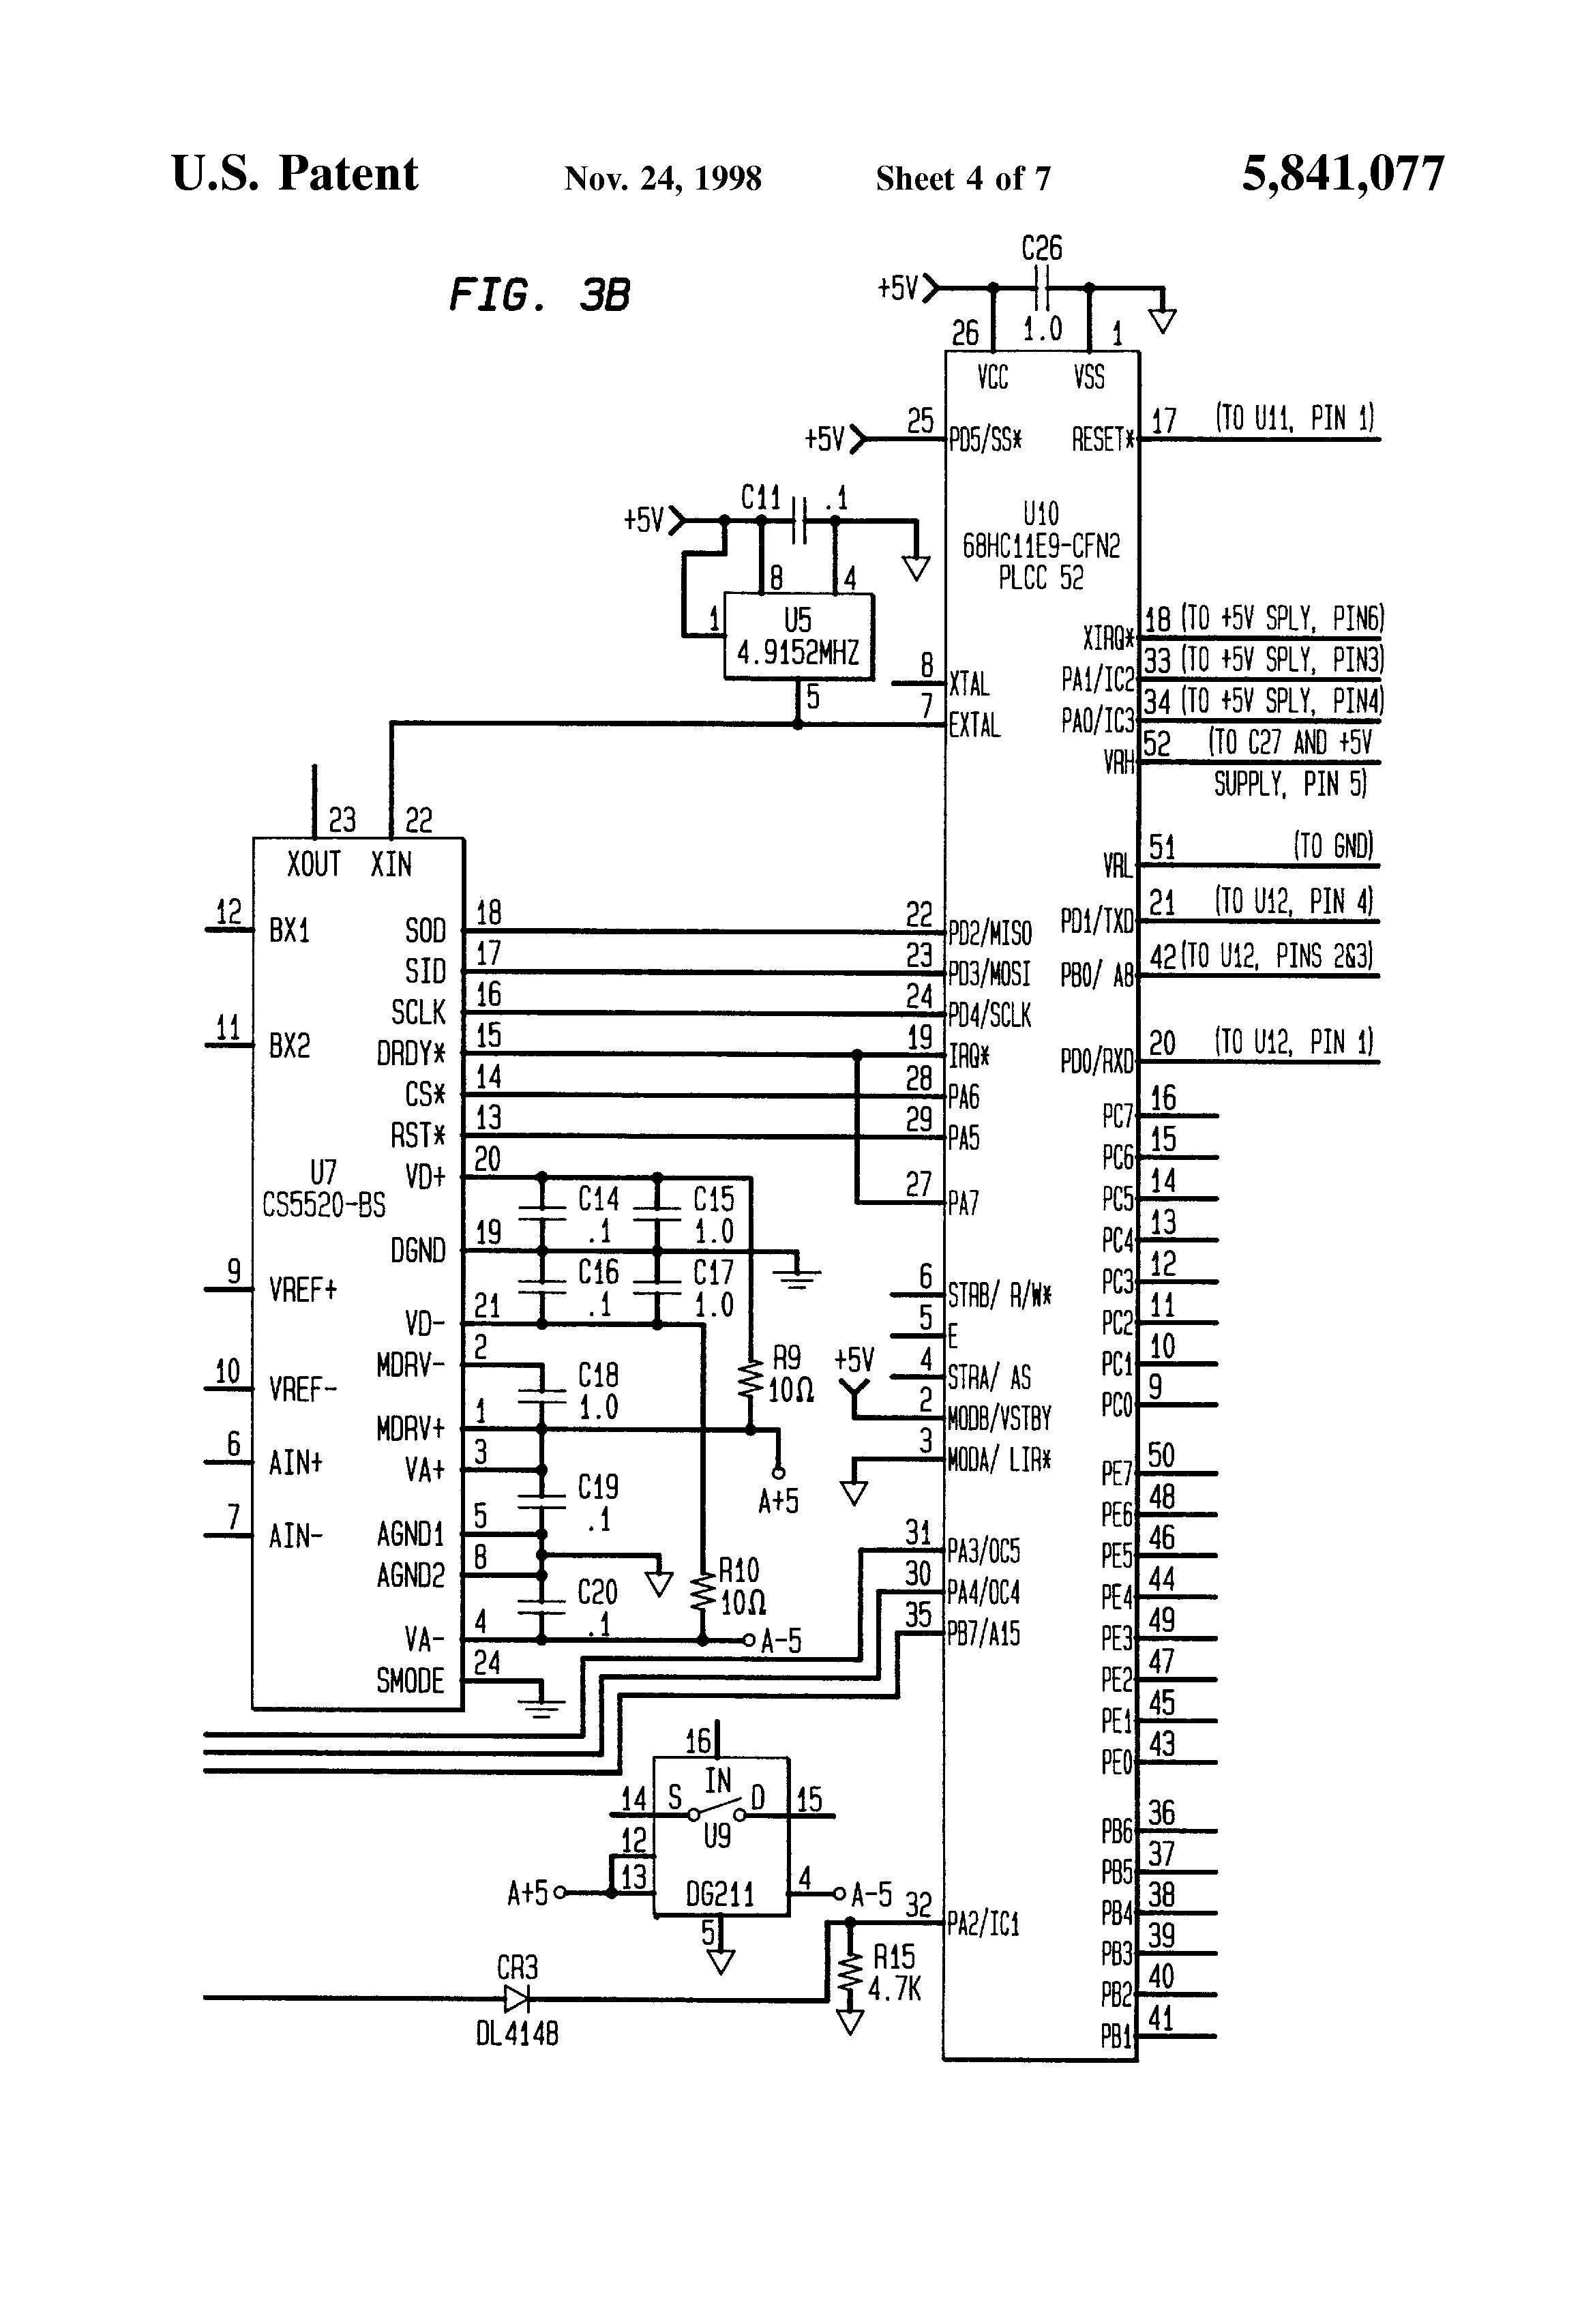 Load Cell Junction Box Wiring Diagram Sample White Rodgers 50e47 843 Wiring Diagram Image